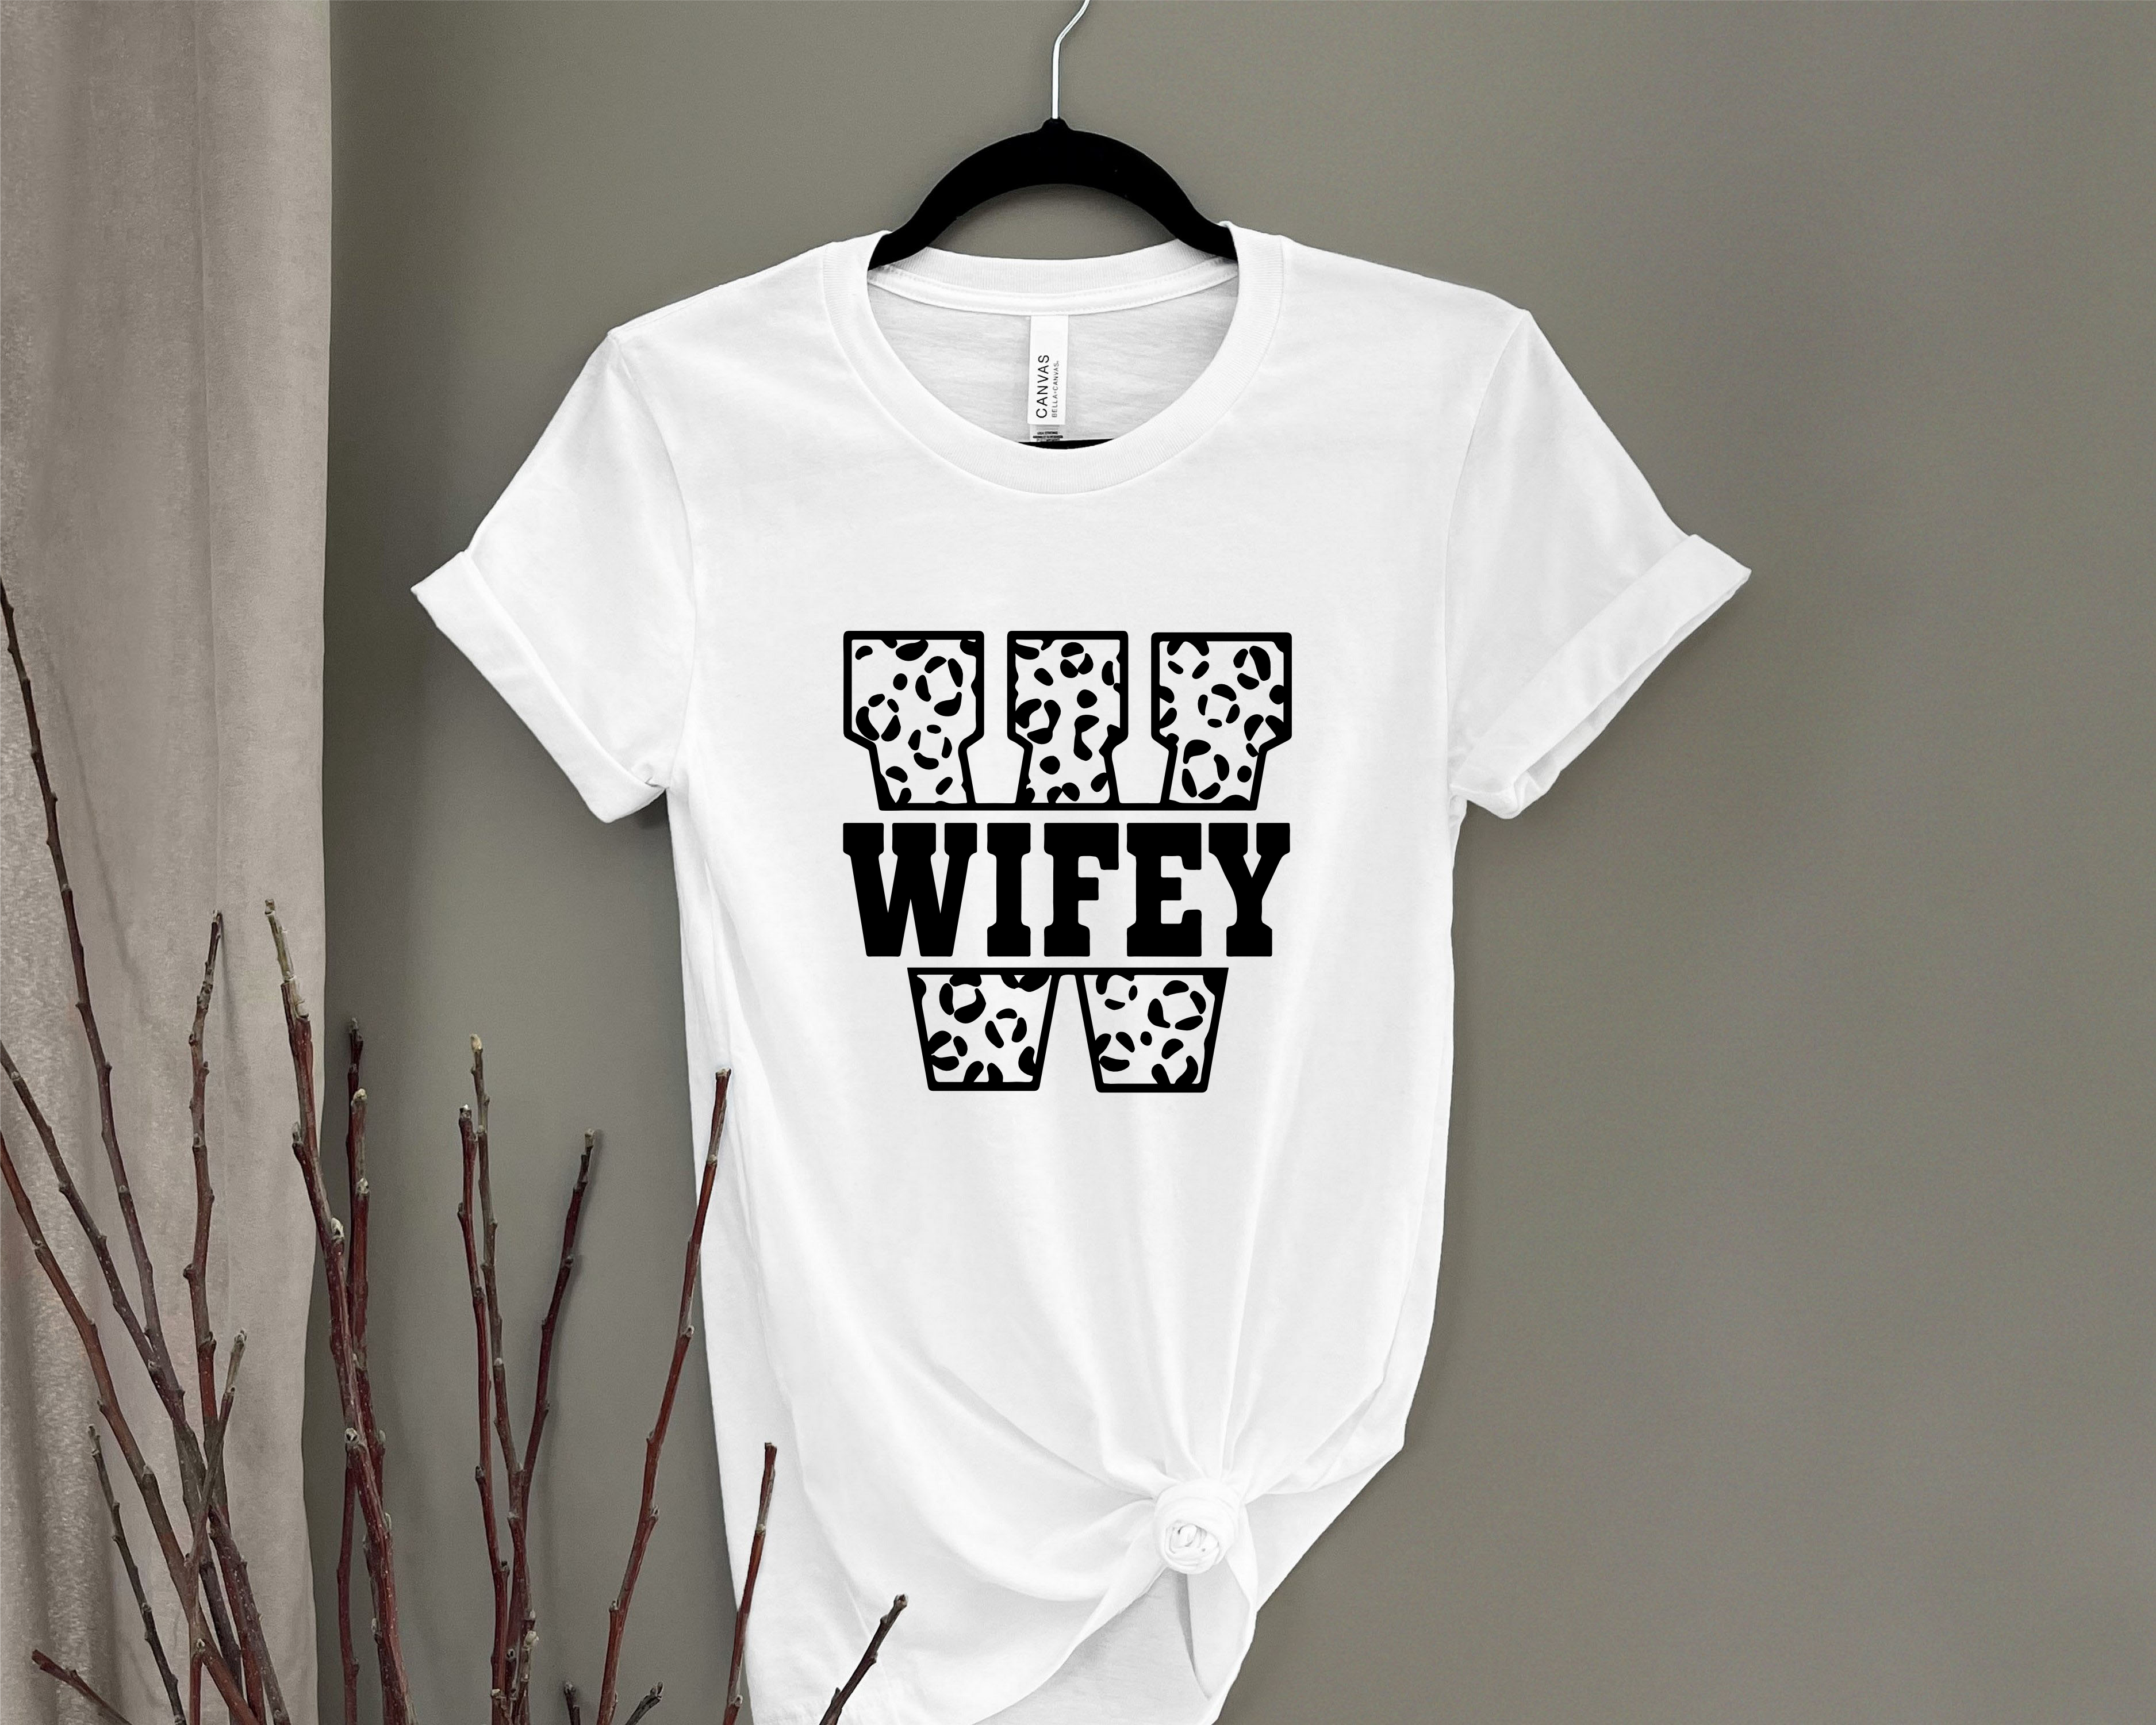 Leopard Print Wifey Shirt  - Commercially Printed Shirt - Fast Turn Around Time